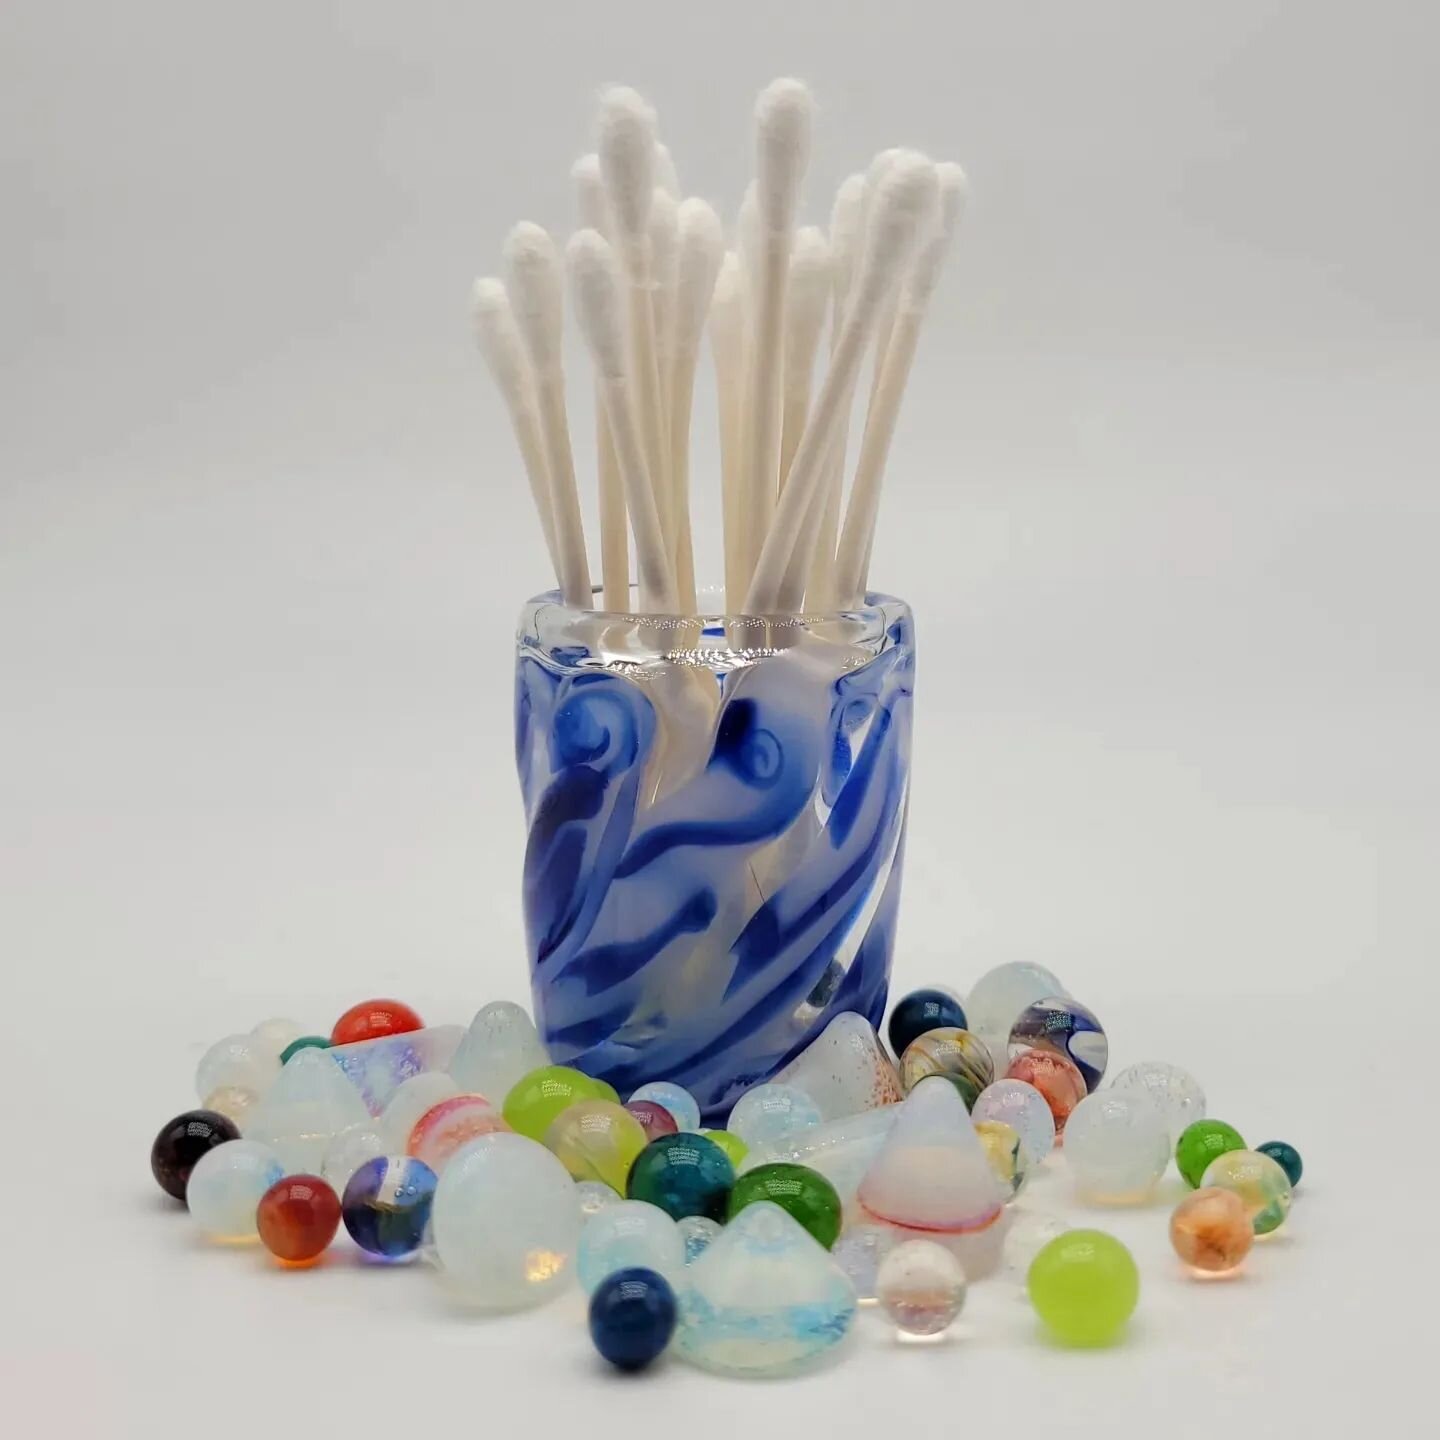 *Sold* - Hi Friends 👋 Todays featured Blue Swirly Jar/Small Shot Glass is made from clear borosilicate glass mixed with a blue and white cane.

No cork/pearls/beads/marbles included. Stickers and next day shipping always included!

🙃 Thanks for loo